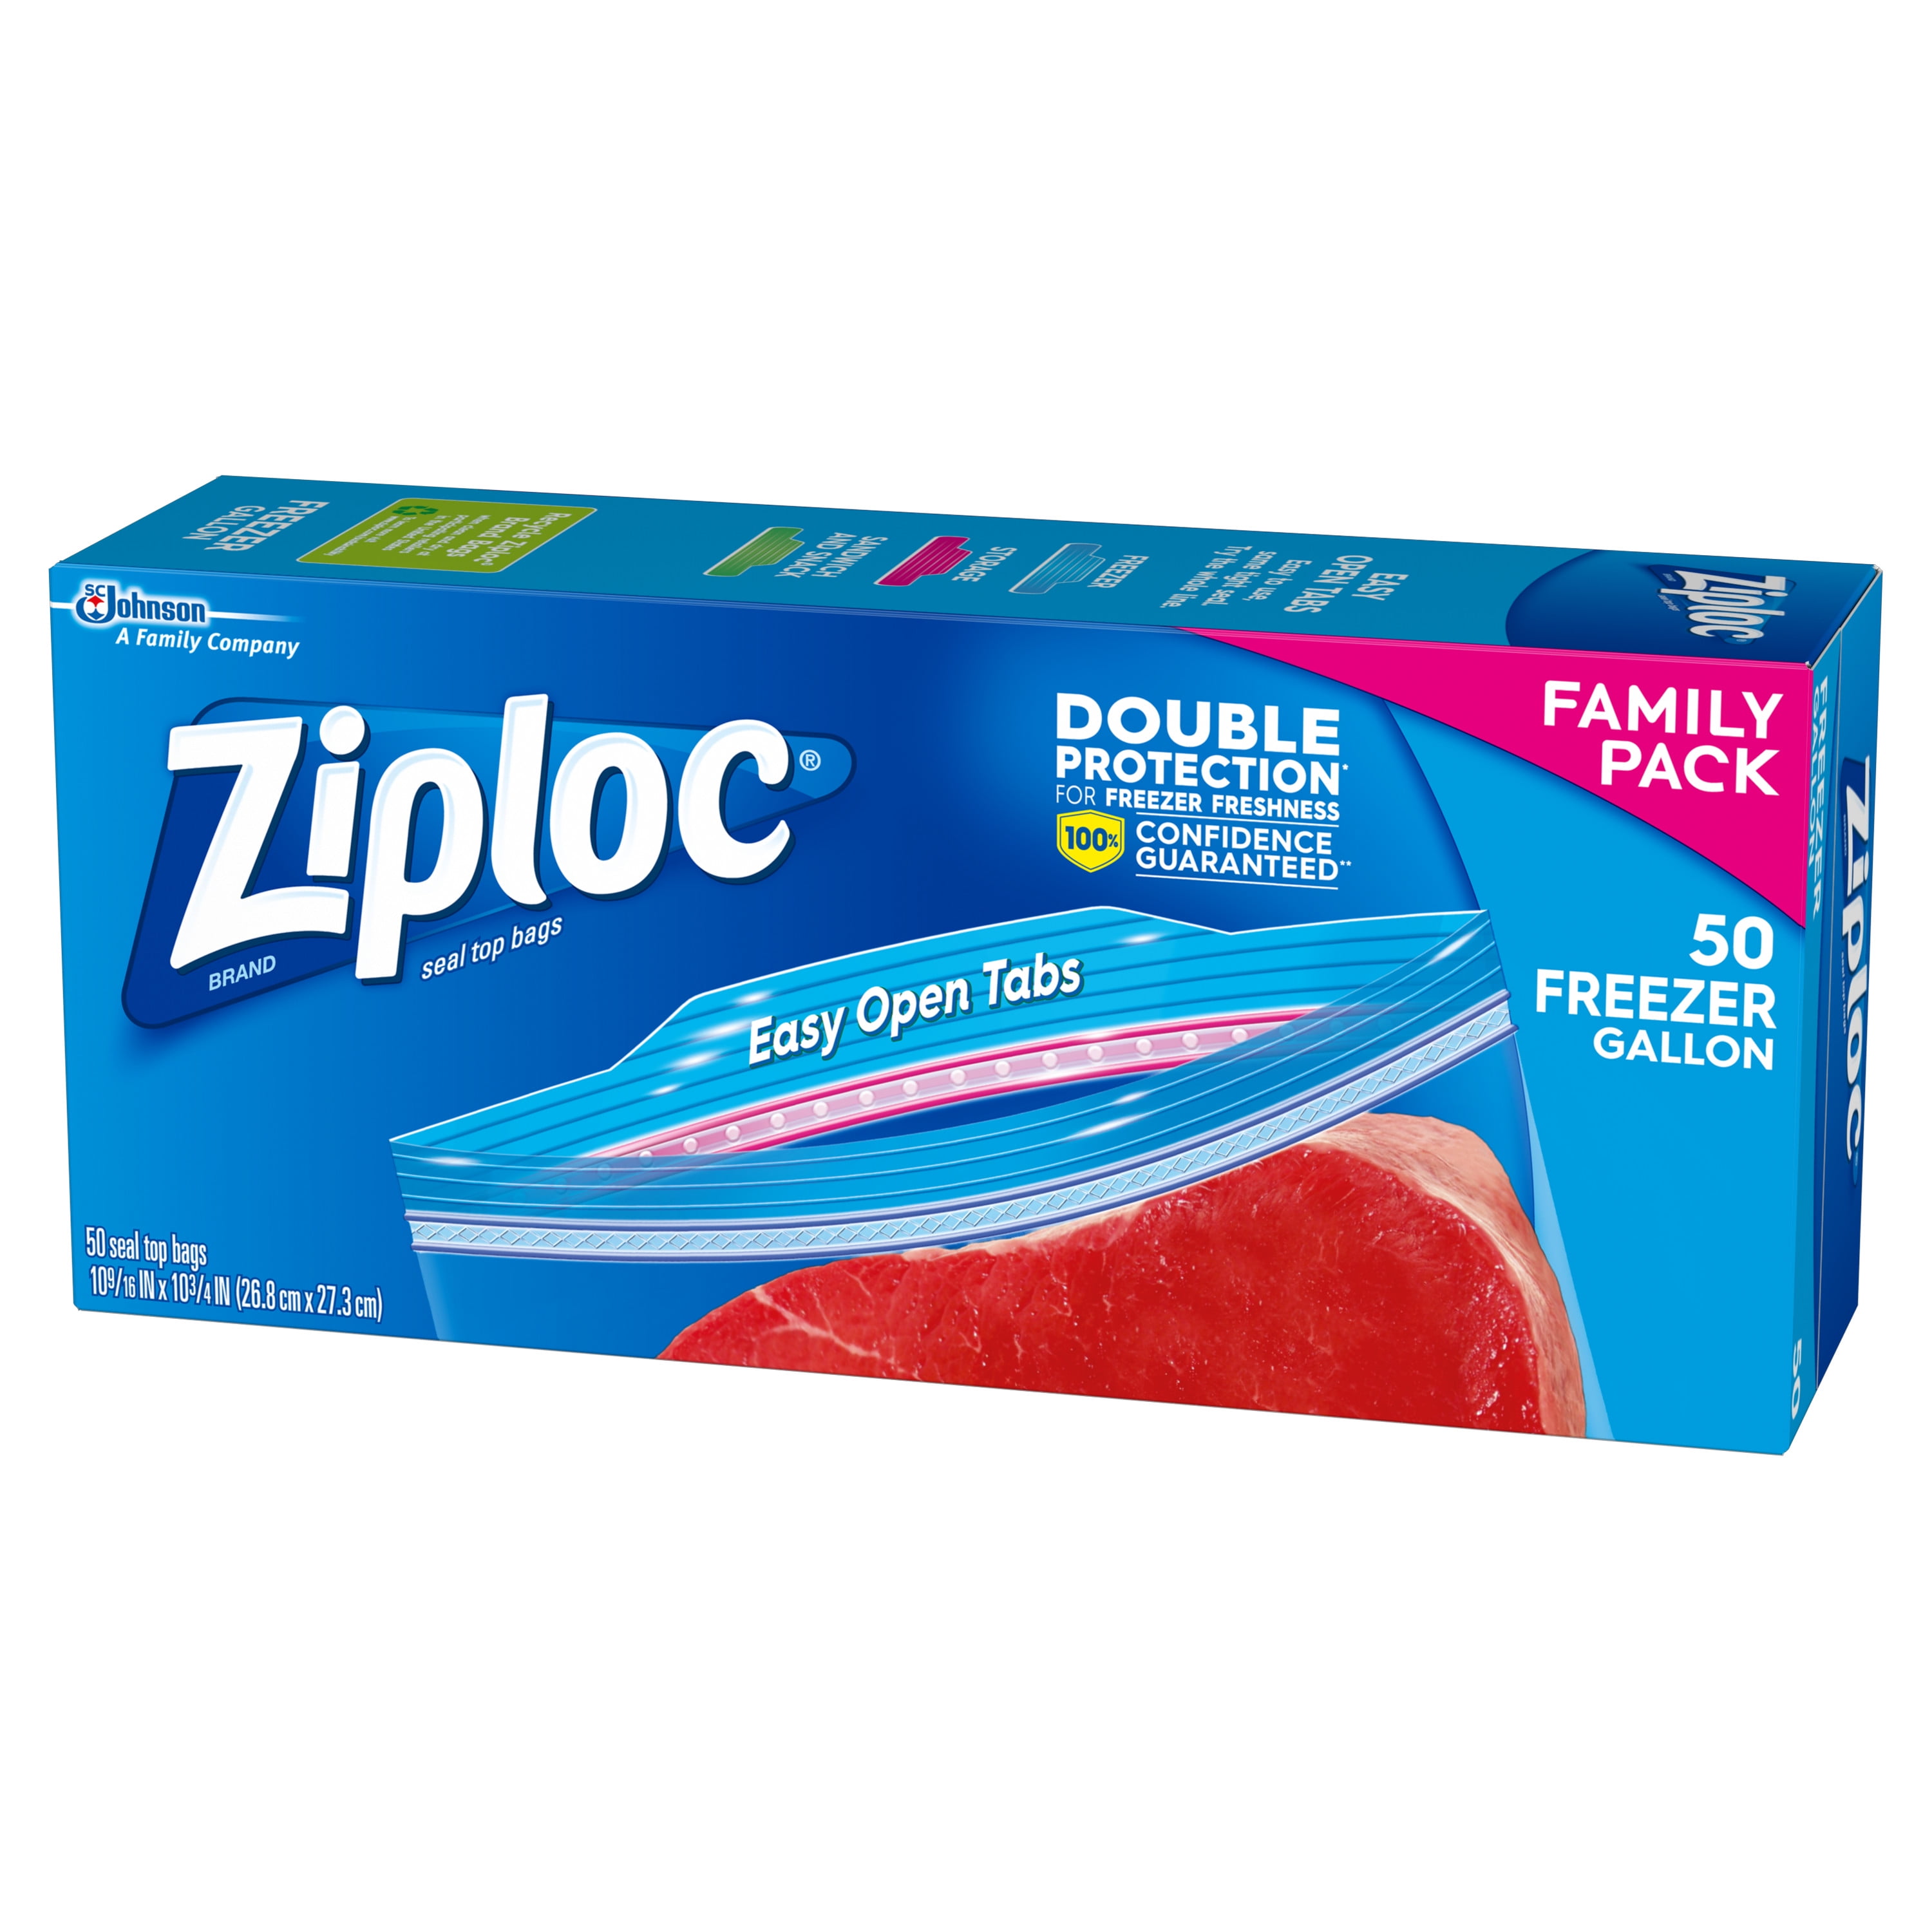 Ziploc Freezer And Storage Bags 1 Gallon Box Of 250 Bags - Office Depot